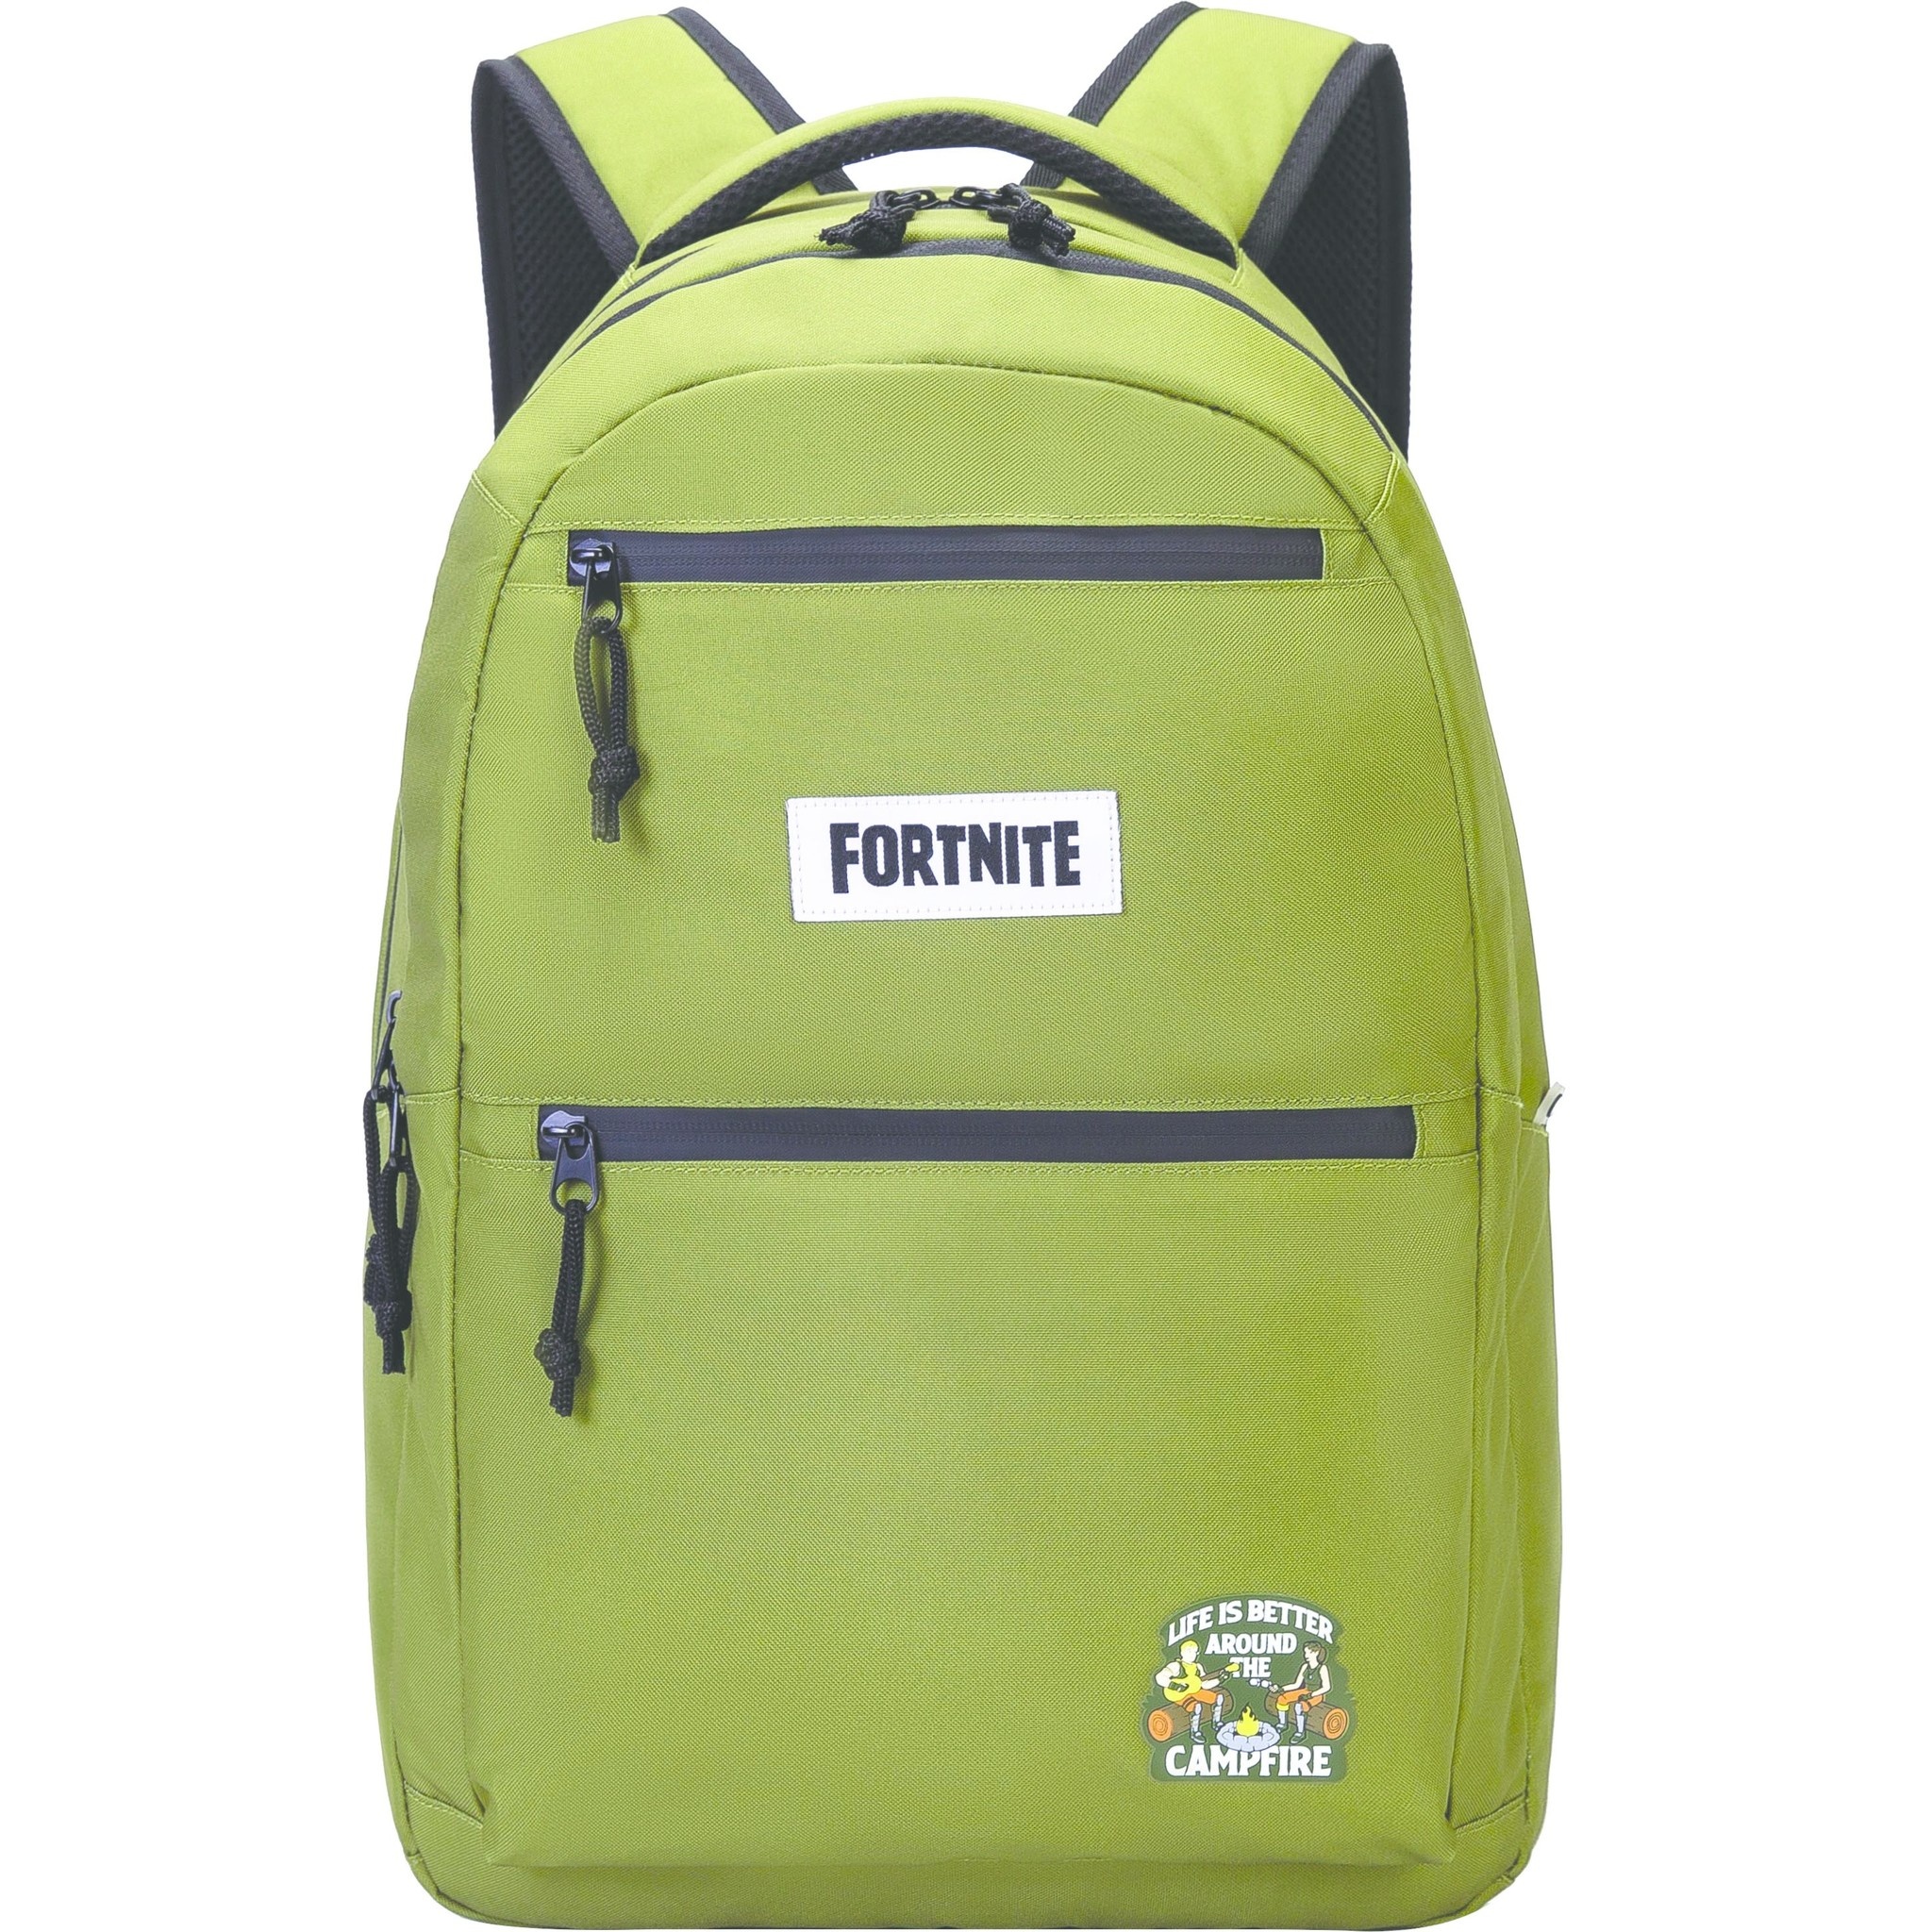 Fortnite Backpack Campfire - 47 x 29 x 14.5 cm - Polyester